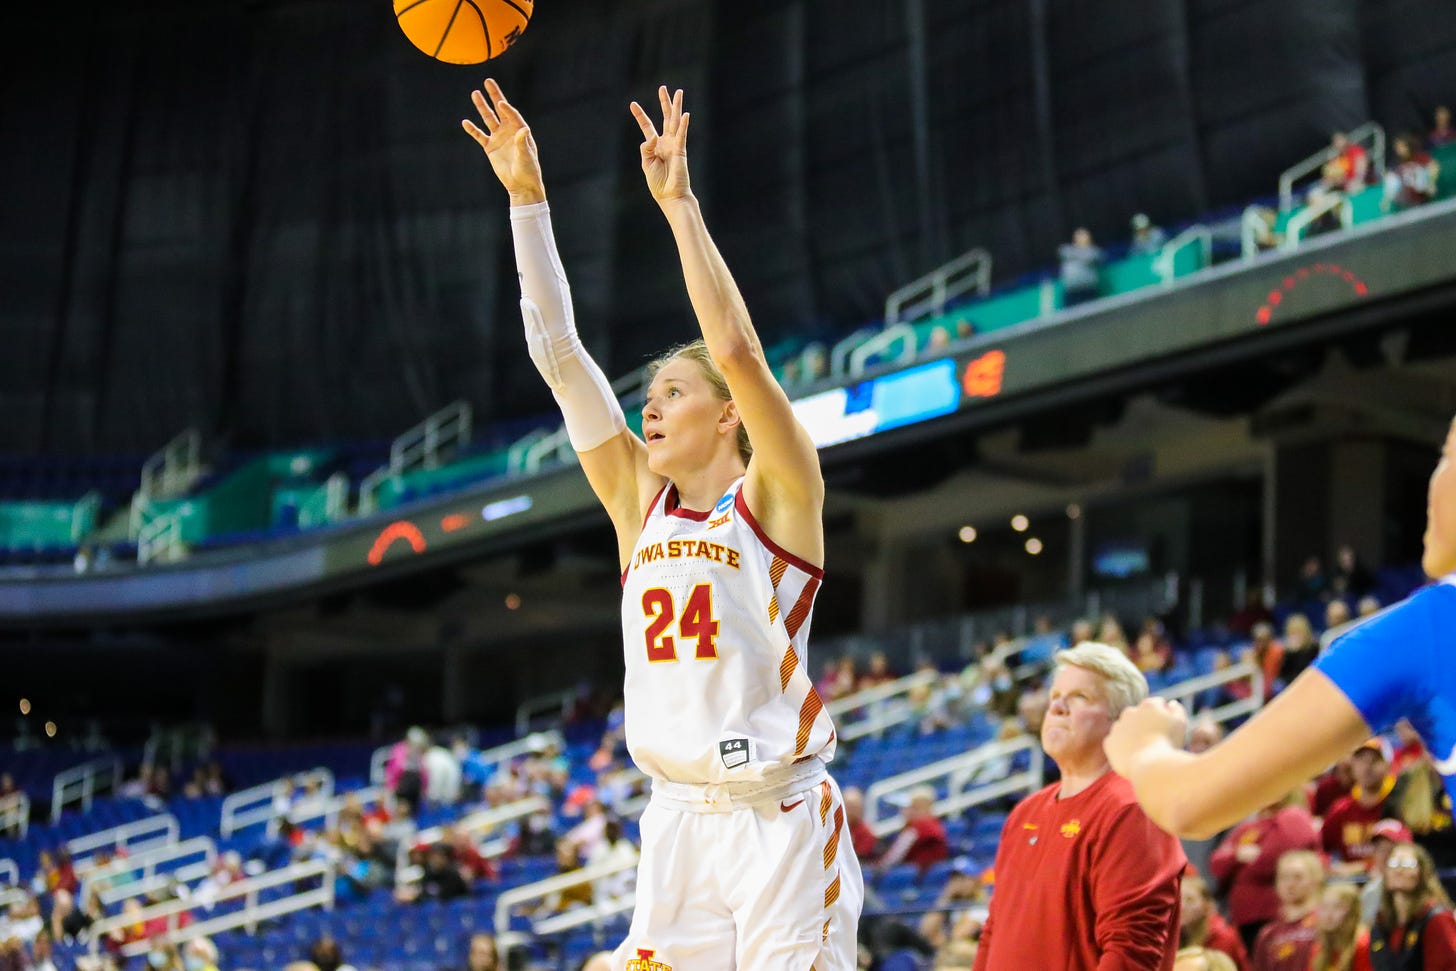 GREENSBORO, NC - MARCH 25: Ashley Joens (24) of the Iowa State Cyclones shoots a three pointer during the NCAA Division I Womens Basketball Championship Sweet Sixteen round game between the Iowa State Cyclones and the Creighton Bluejays on March 25, 2022, at Greensboro Coliseum in Greensboro, NC.